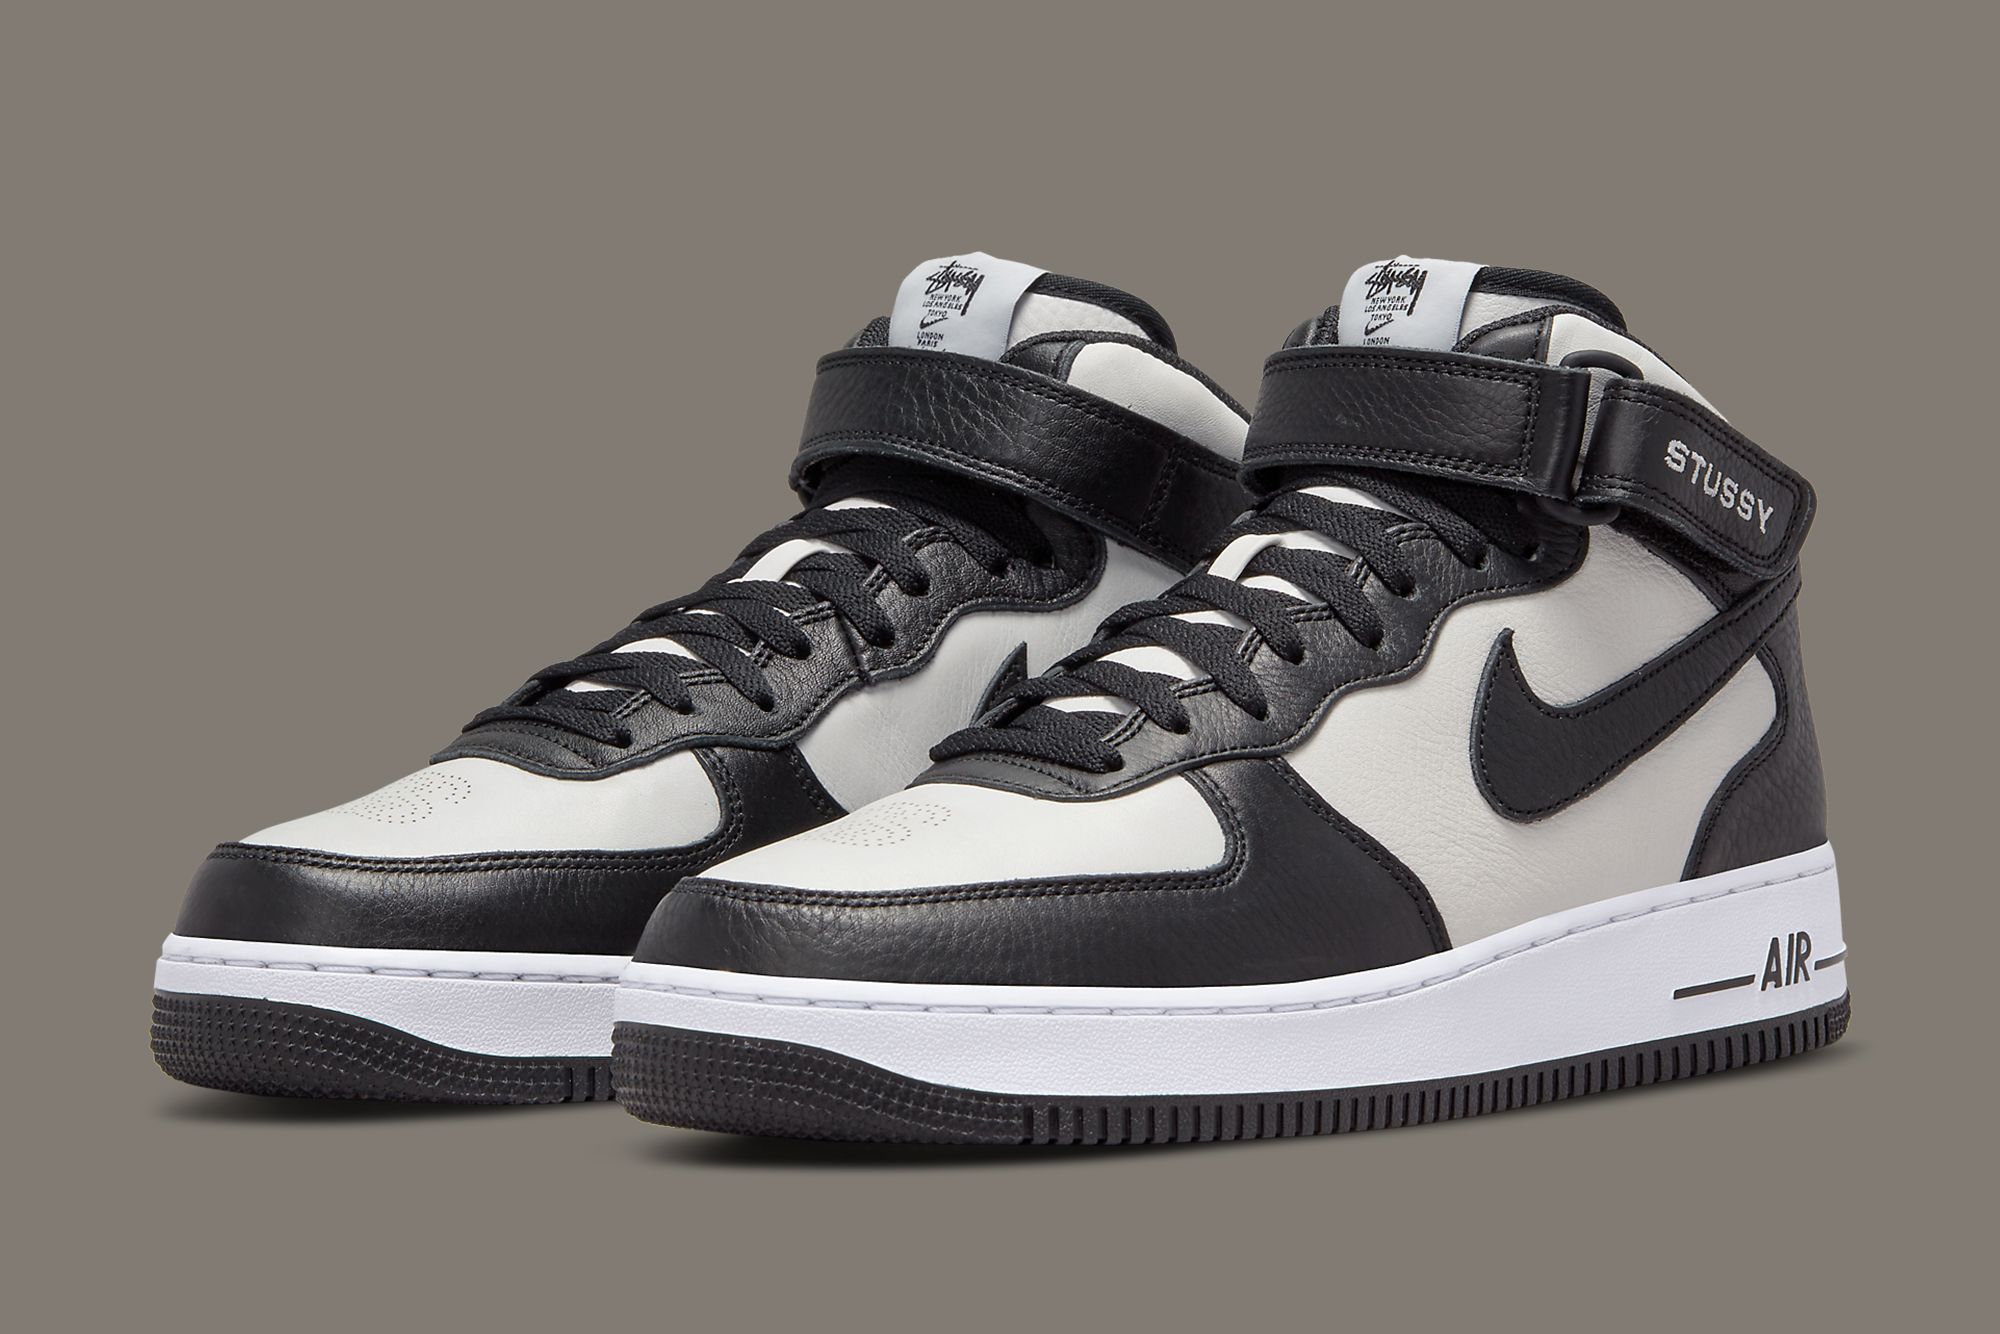 The Stussy x Nike Air Force 1 Mid Black/White Is Releasing on 